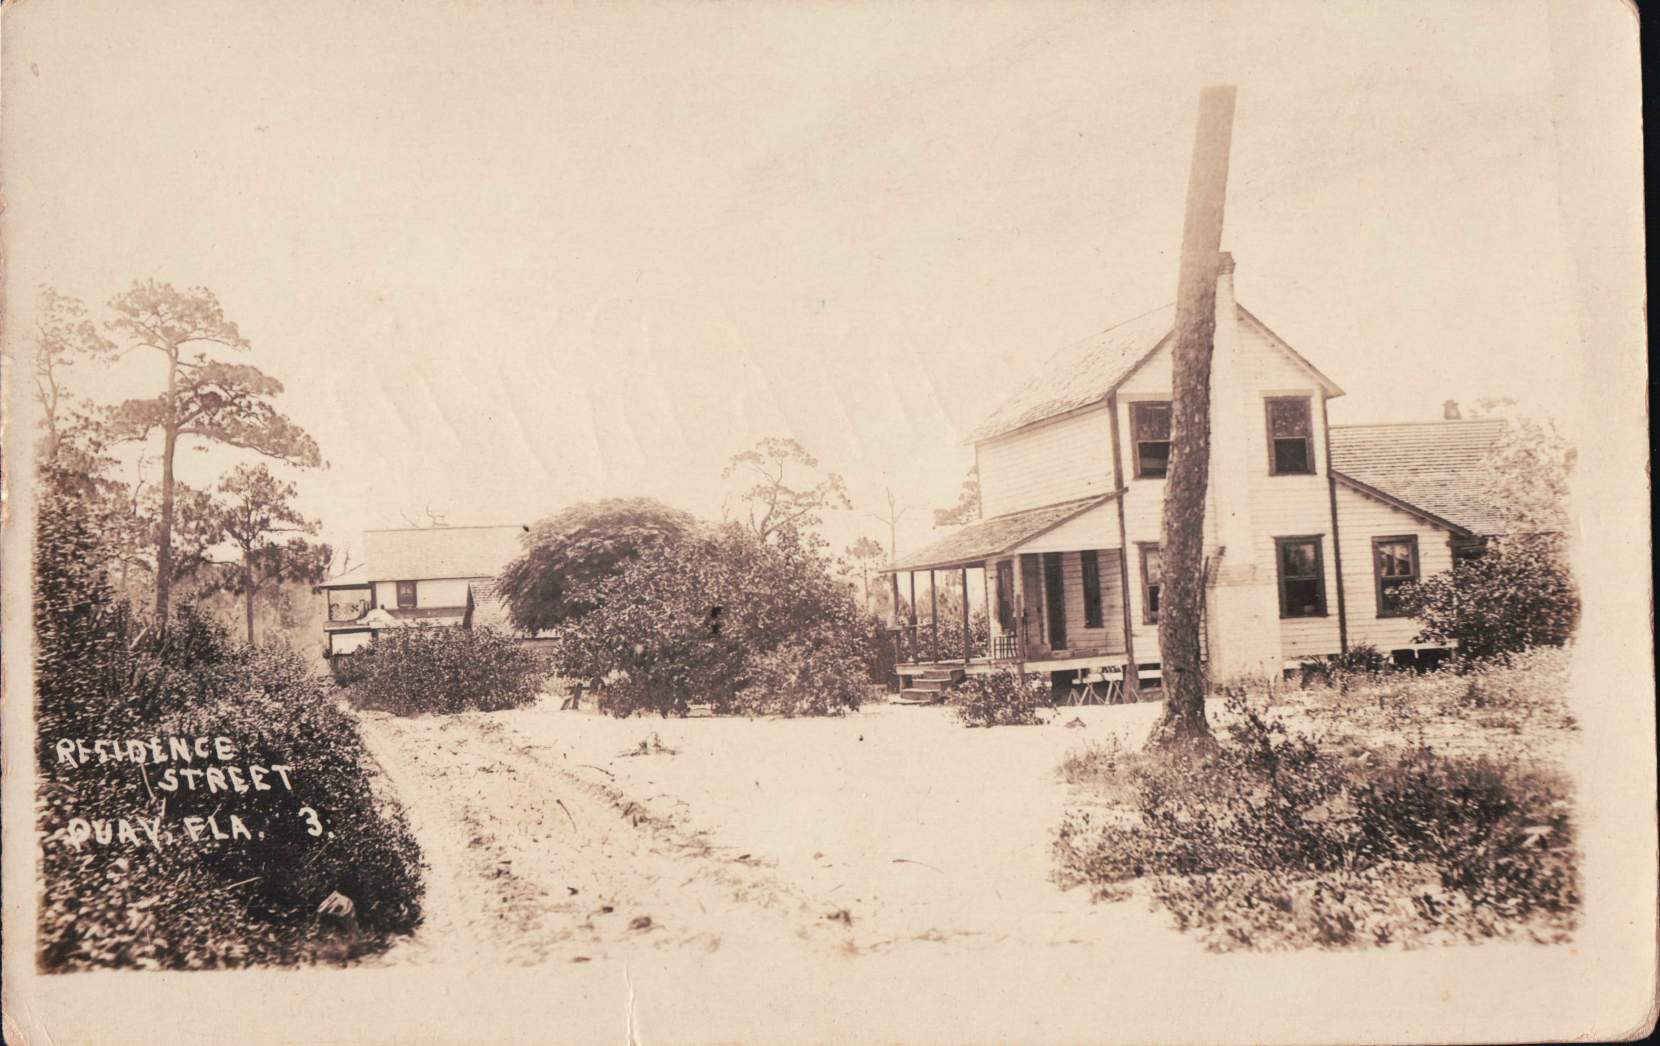 Old photo of Residence Street. Quay, Fl. 3